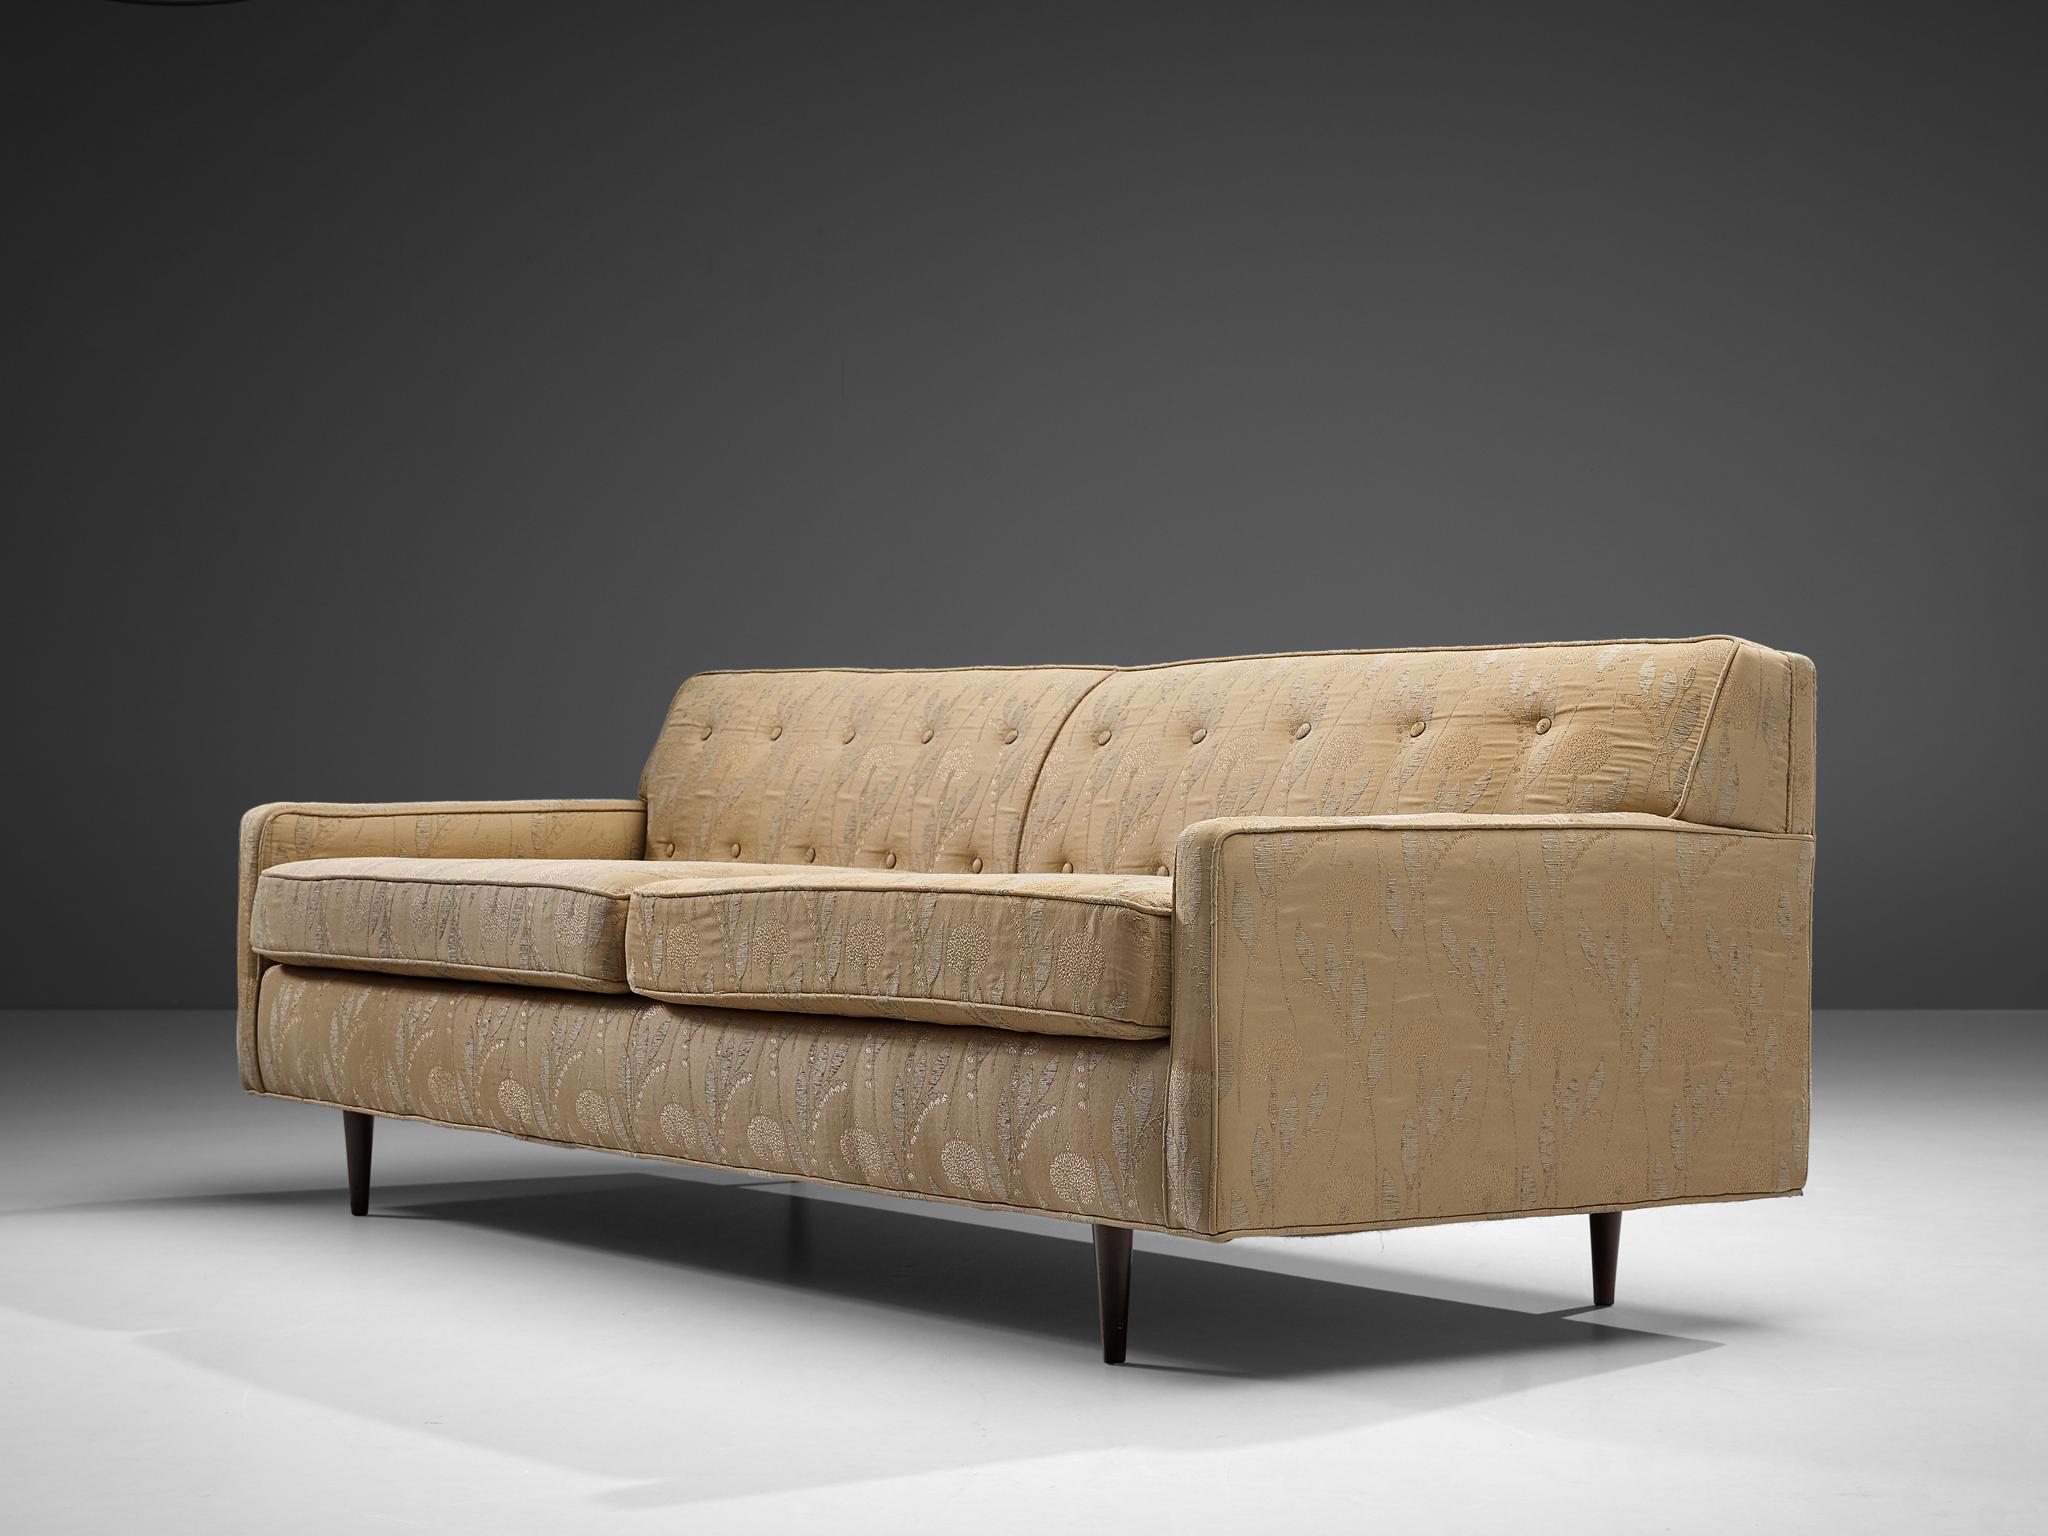 Mid-20th Century Edward Wormley for Dunbar Sofa in Beige Upholstery with Floral Motifs For Sale